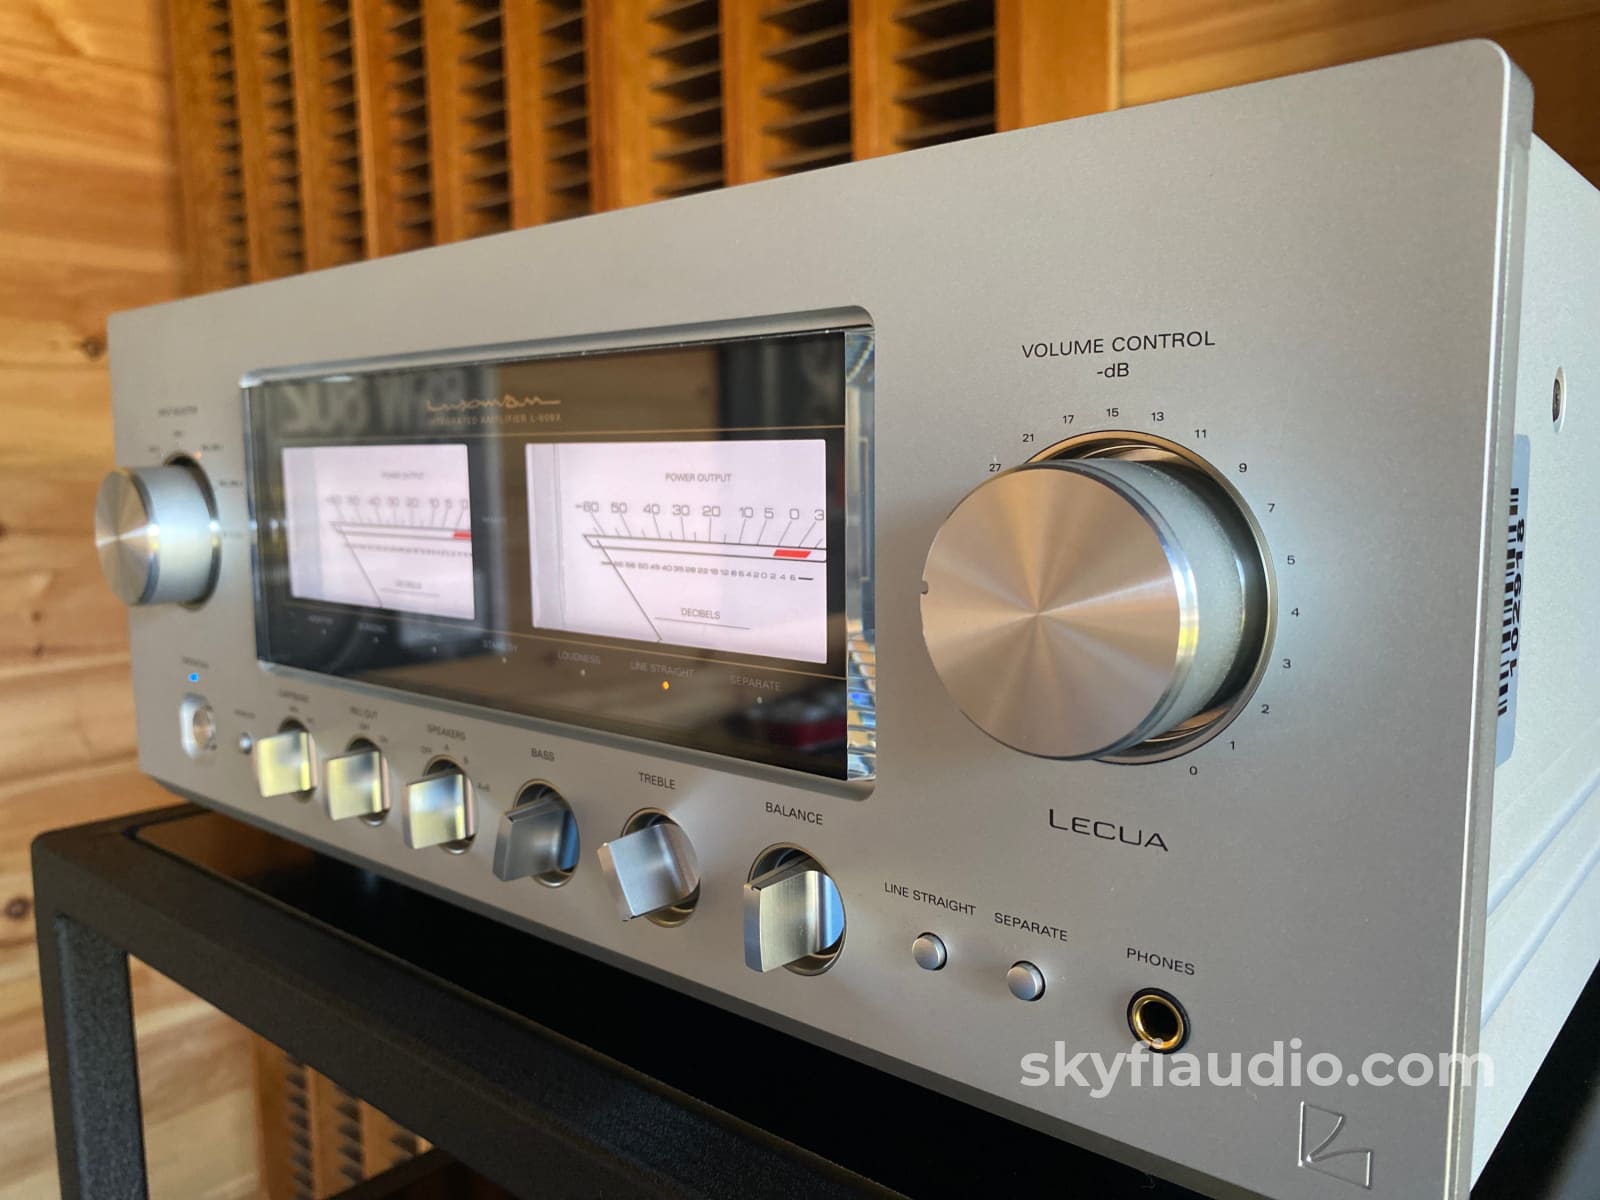 Luxman L-509X Solid State Integrated Amplifier - Demo And Complete